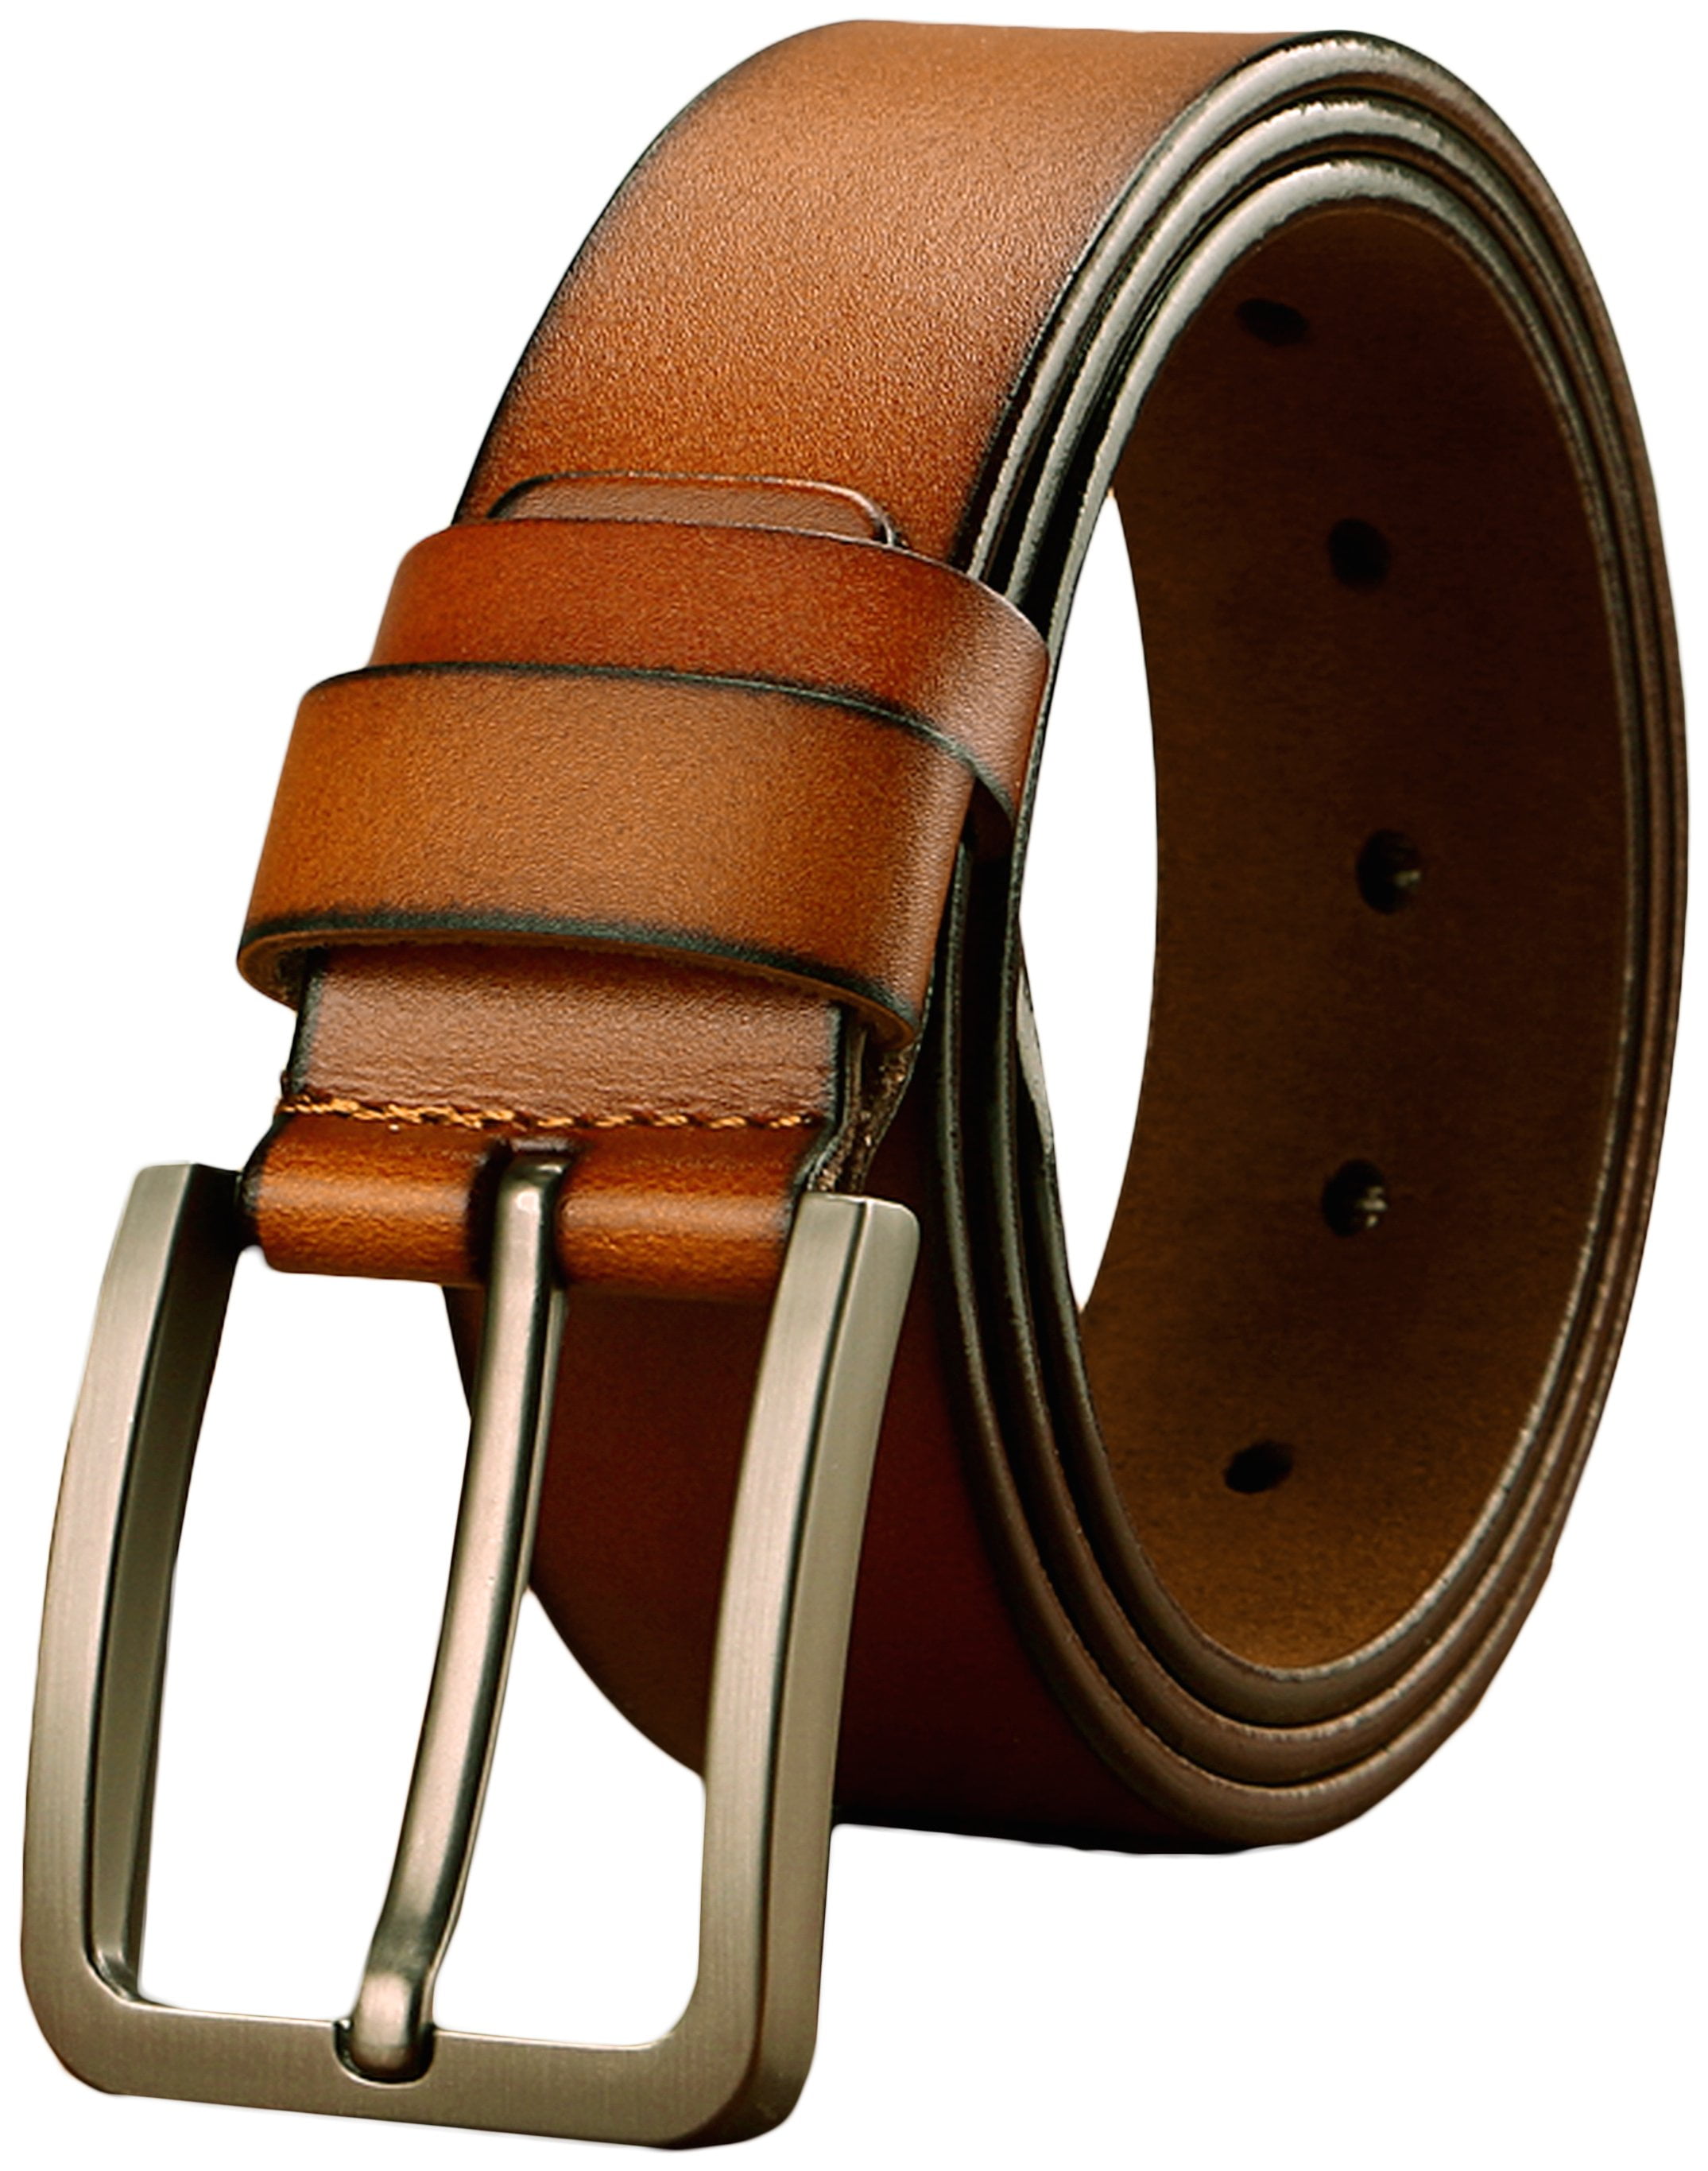 New Fashion Men Belt Genuine Leather Strap Luxury Pin Buckle Hand Made 